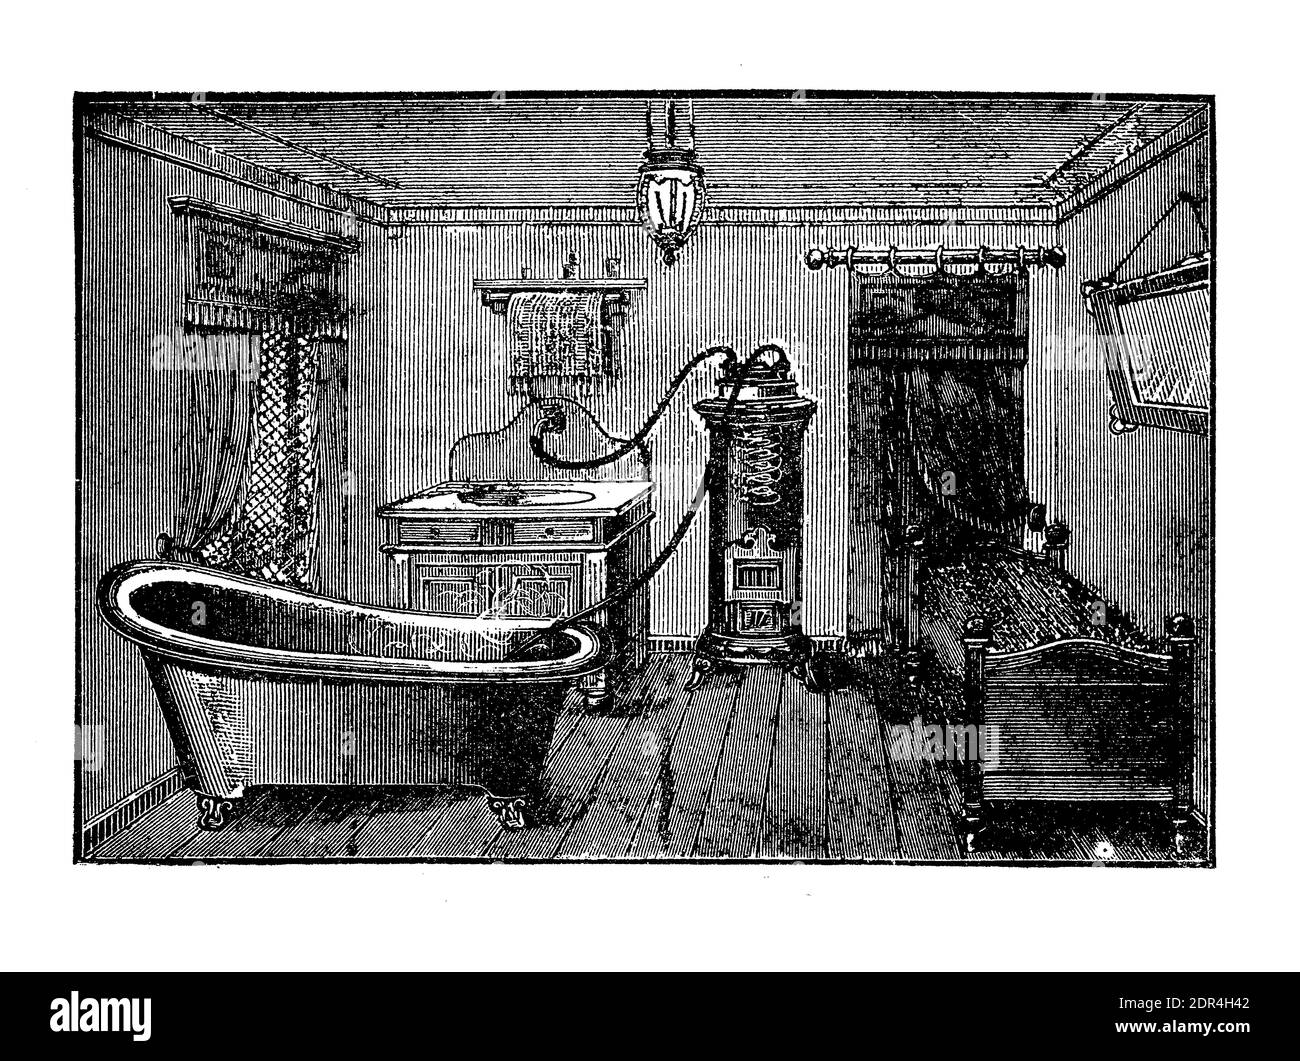 Preparing a bath at home by filling up the tub with hot water with the aid of a rubber hose from the stove heather, 19th century engraving Stock Photo